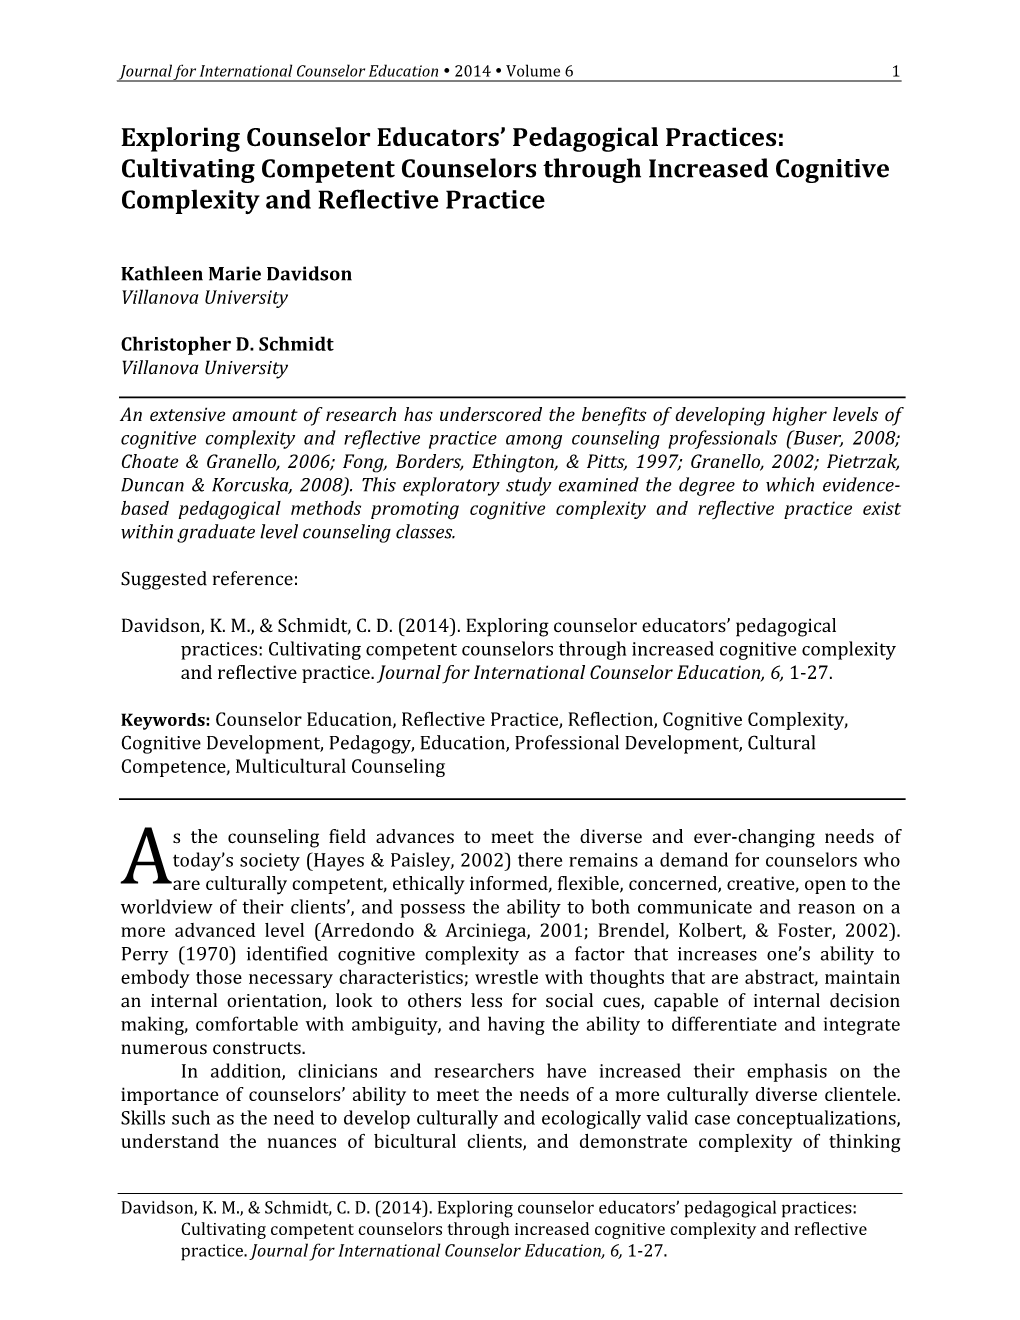 Cultivating Competent Counselors Through Increased Cognitive Complexity and Reflective Practice